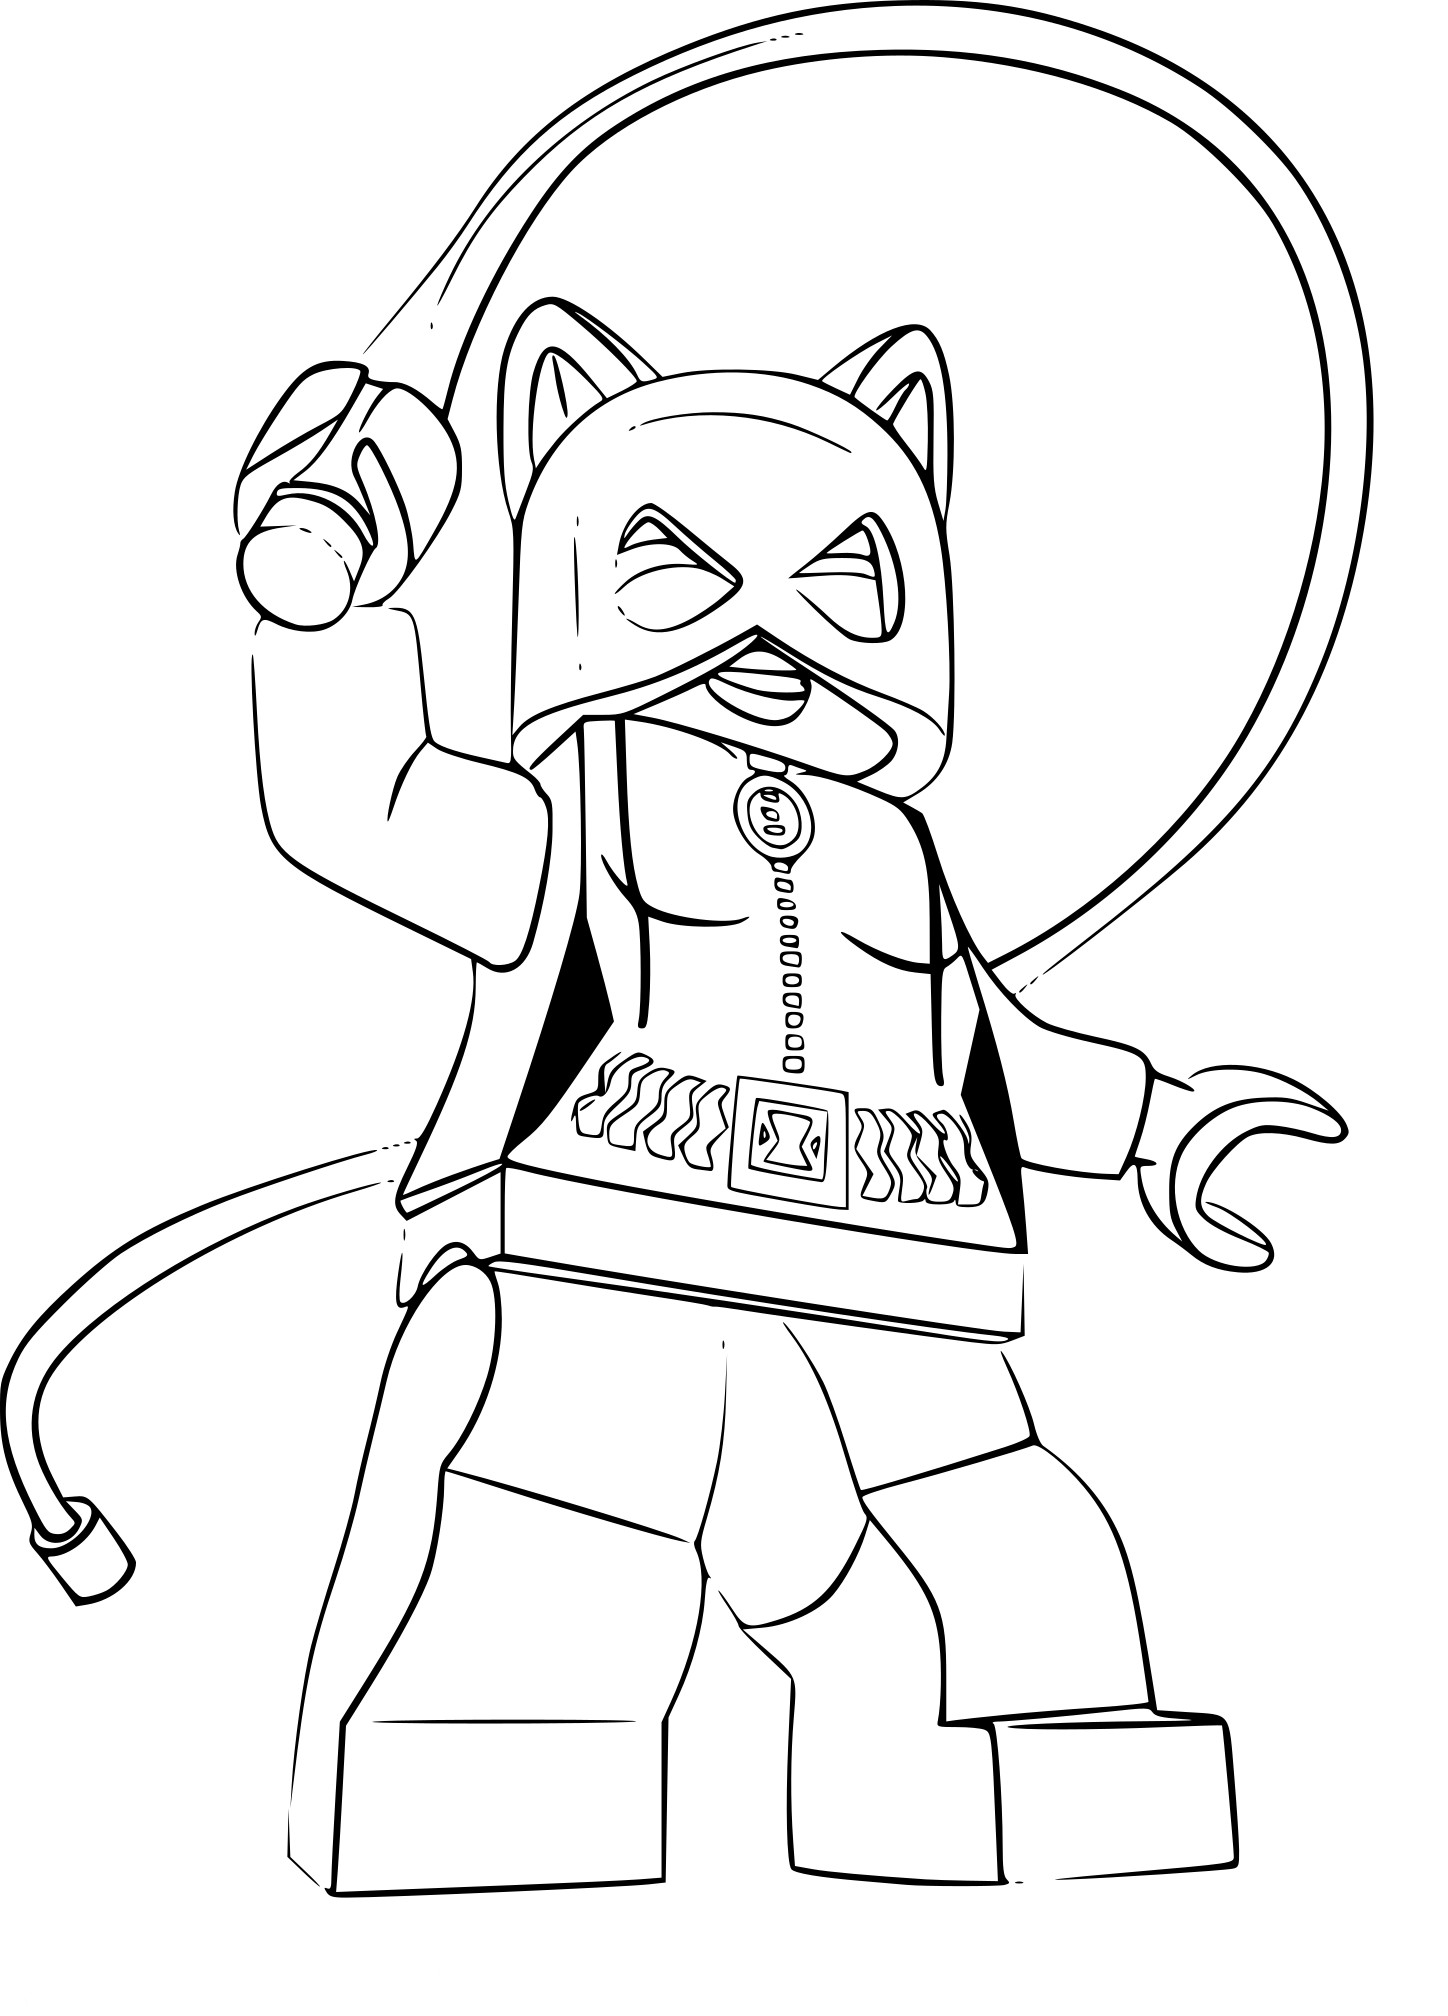 lego catwoman coloring pages